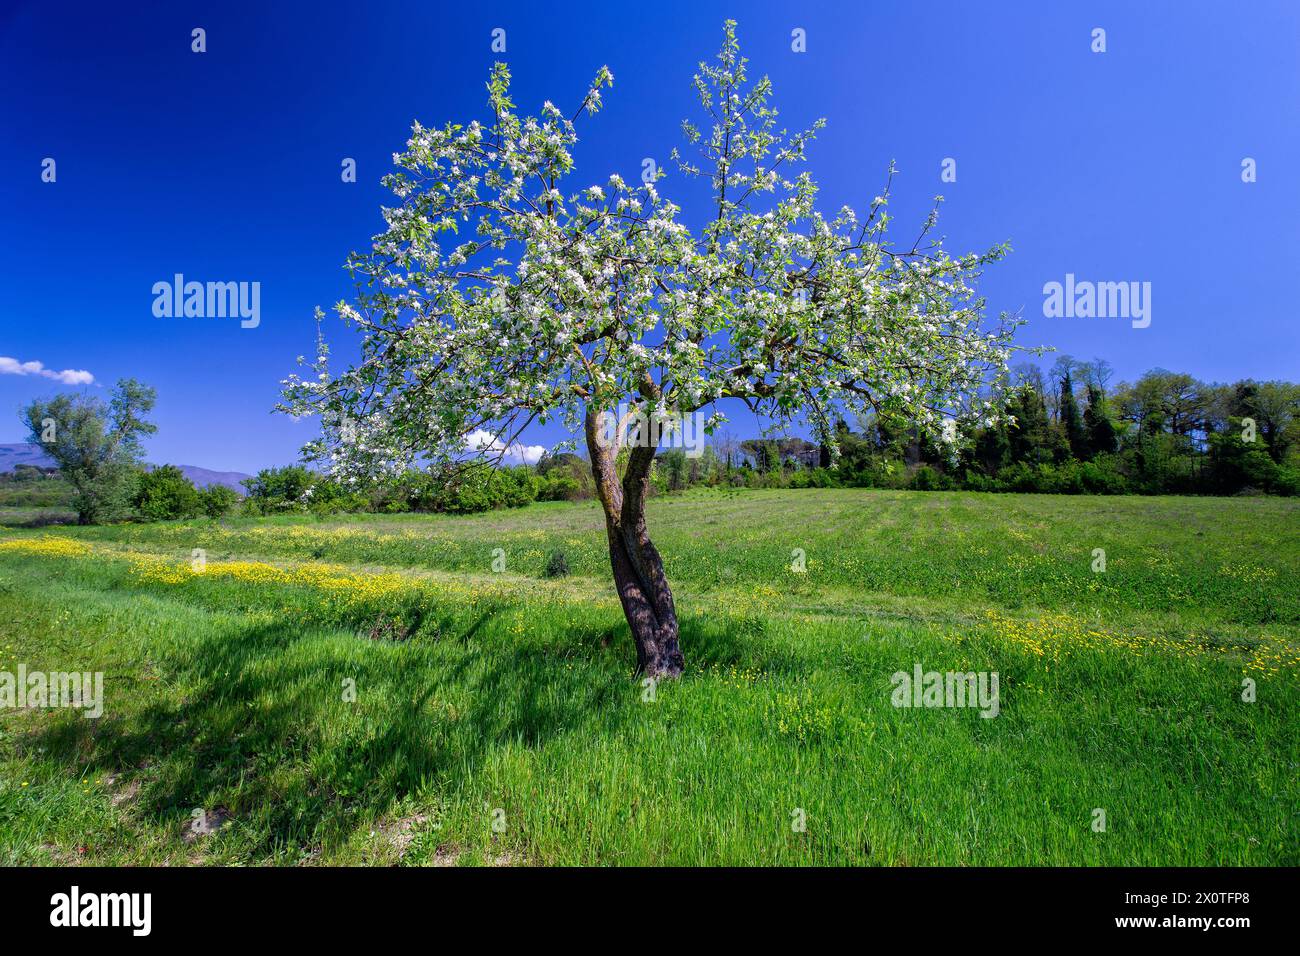 Apple tree in flower (Malus domestica), Rosaceae. Fruit tree, cultivated plant, white flowers Stock Photo